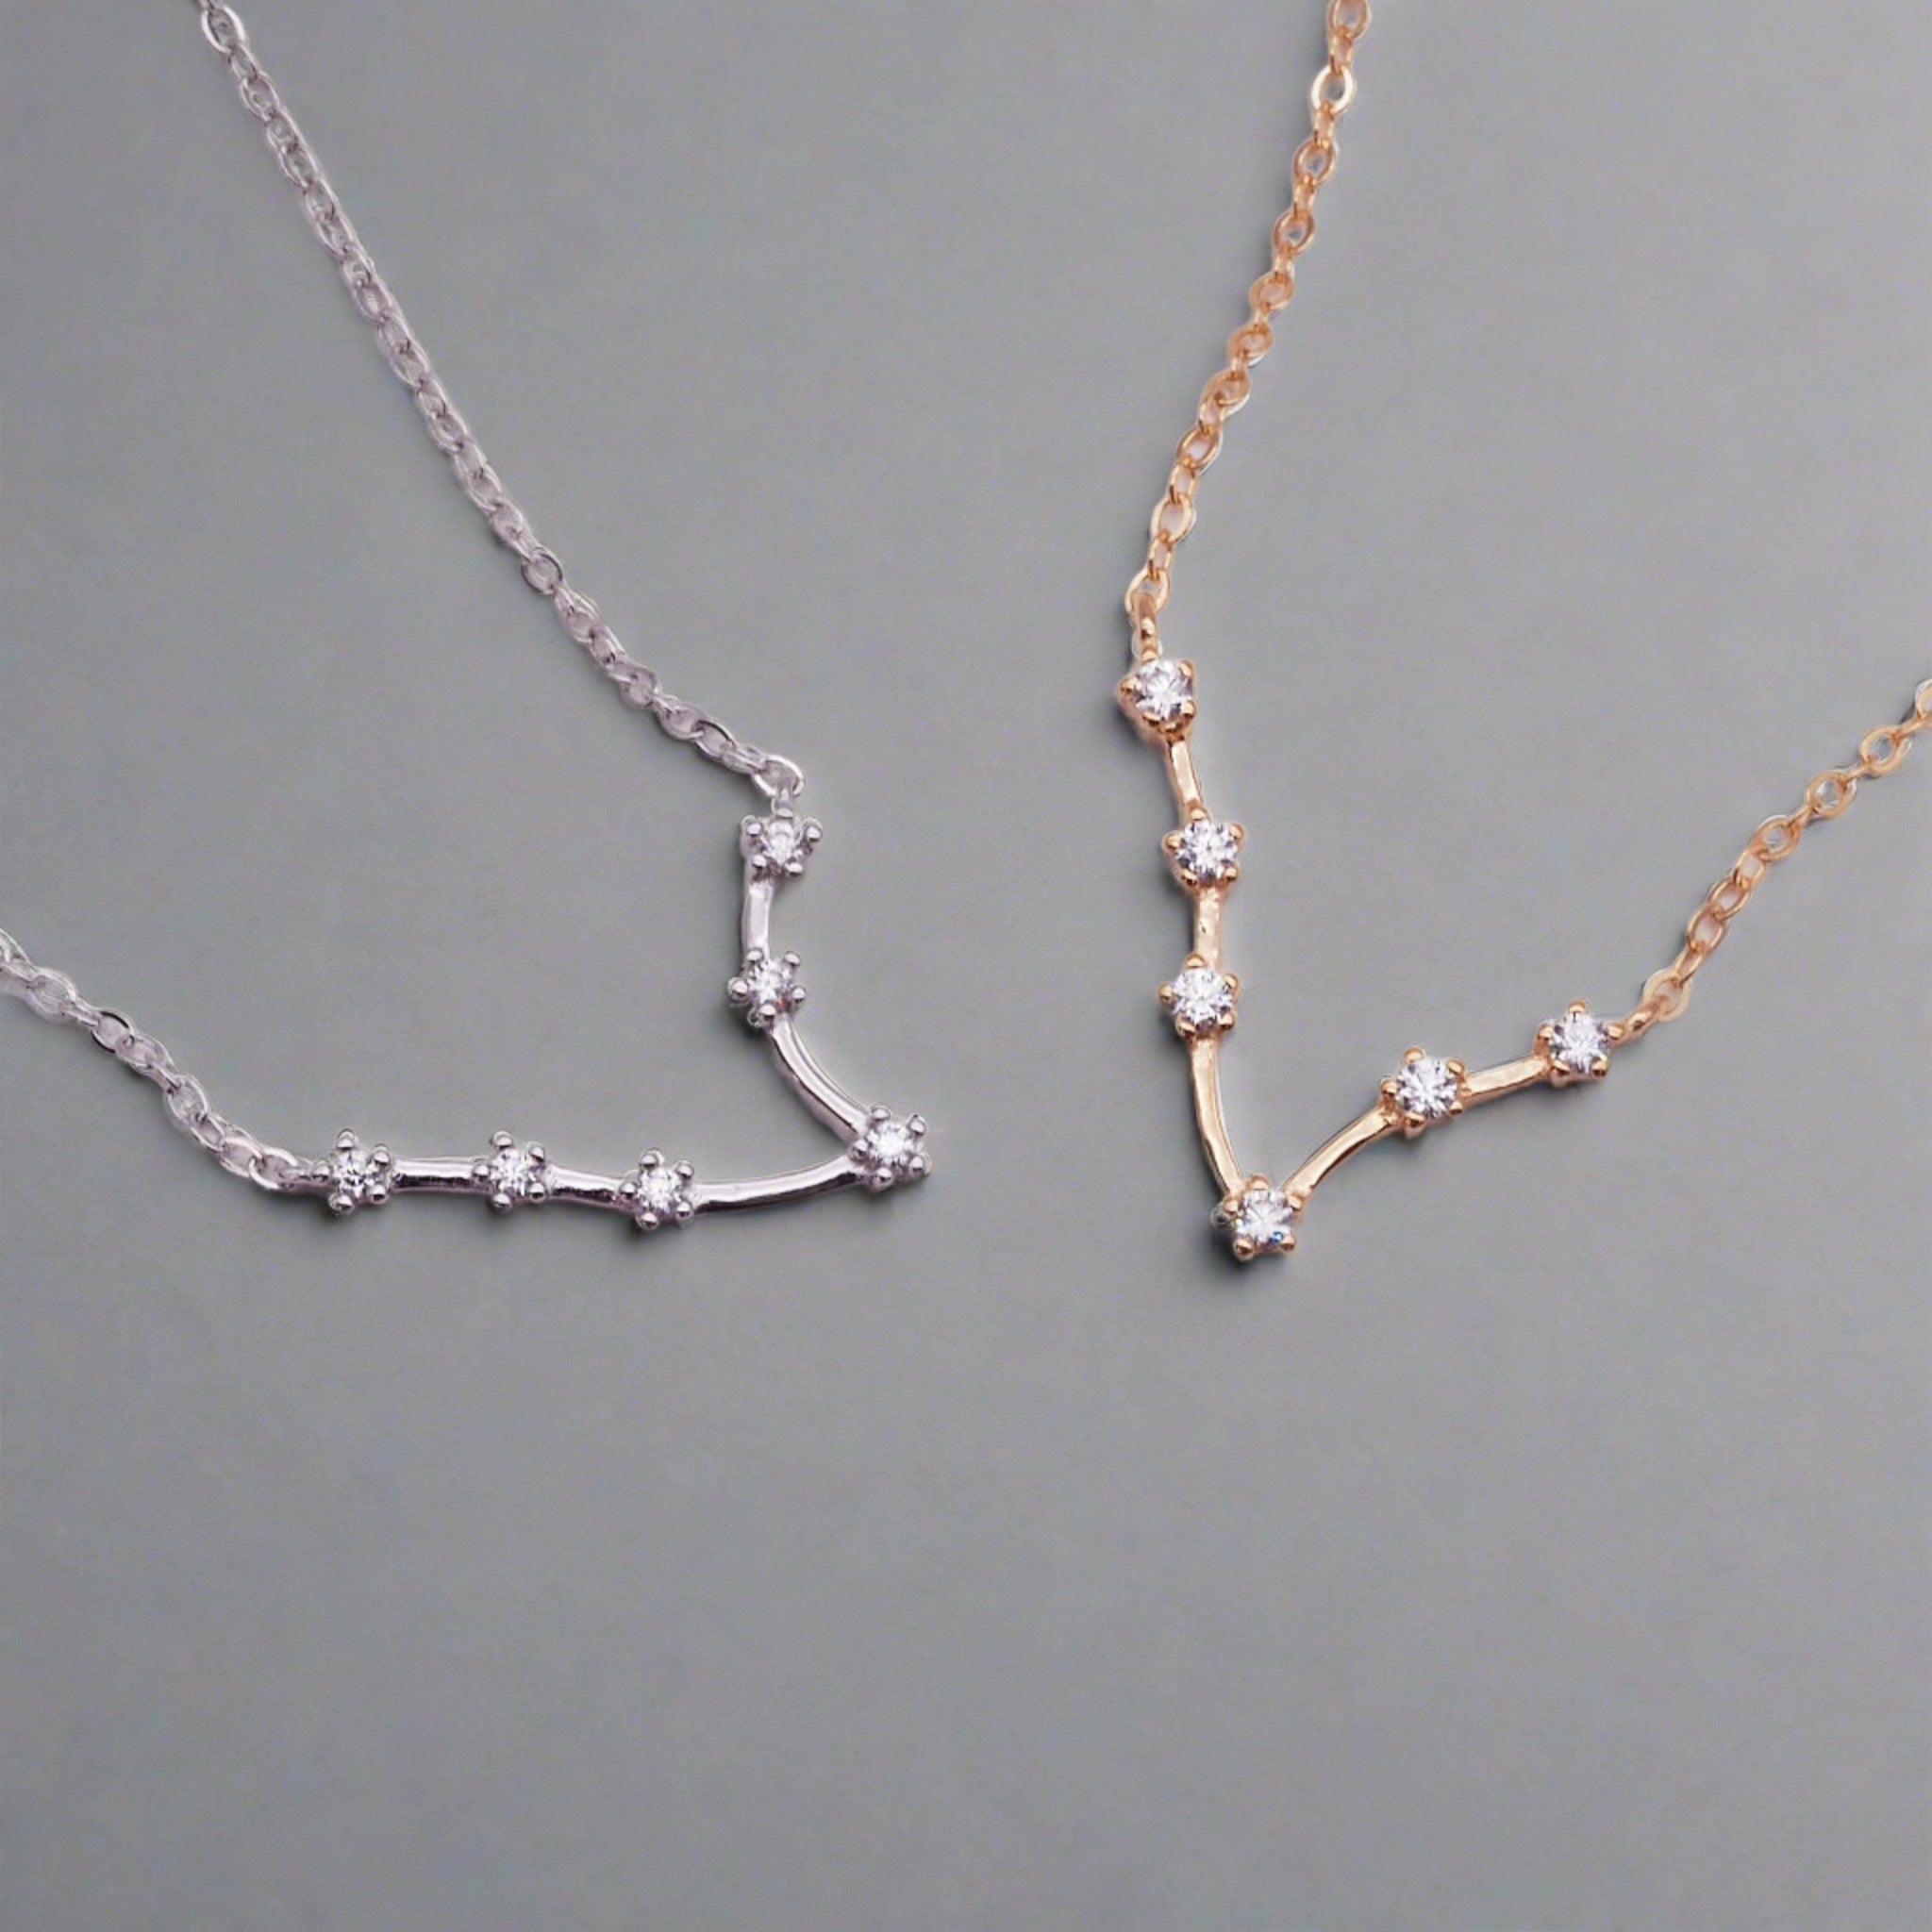 Pisces Constellation Necklace - womens jewellery by indie and harper